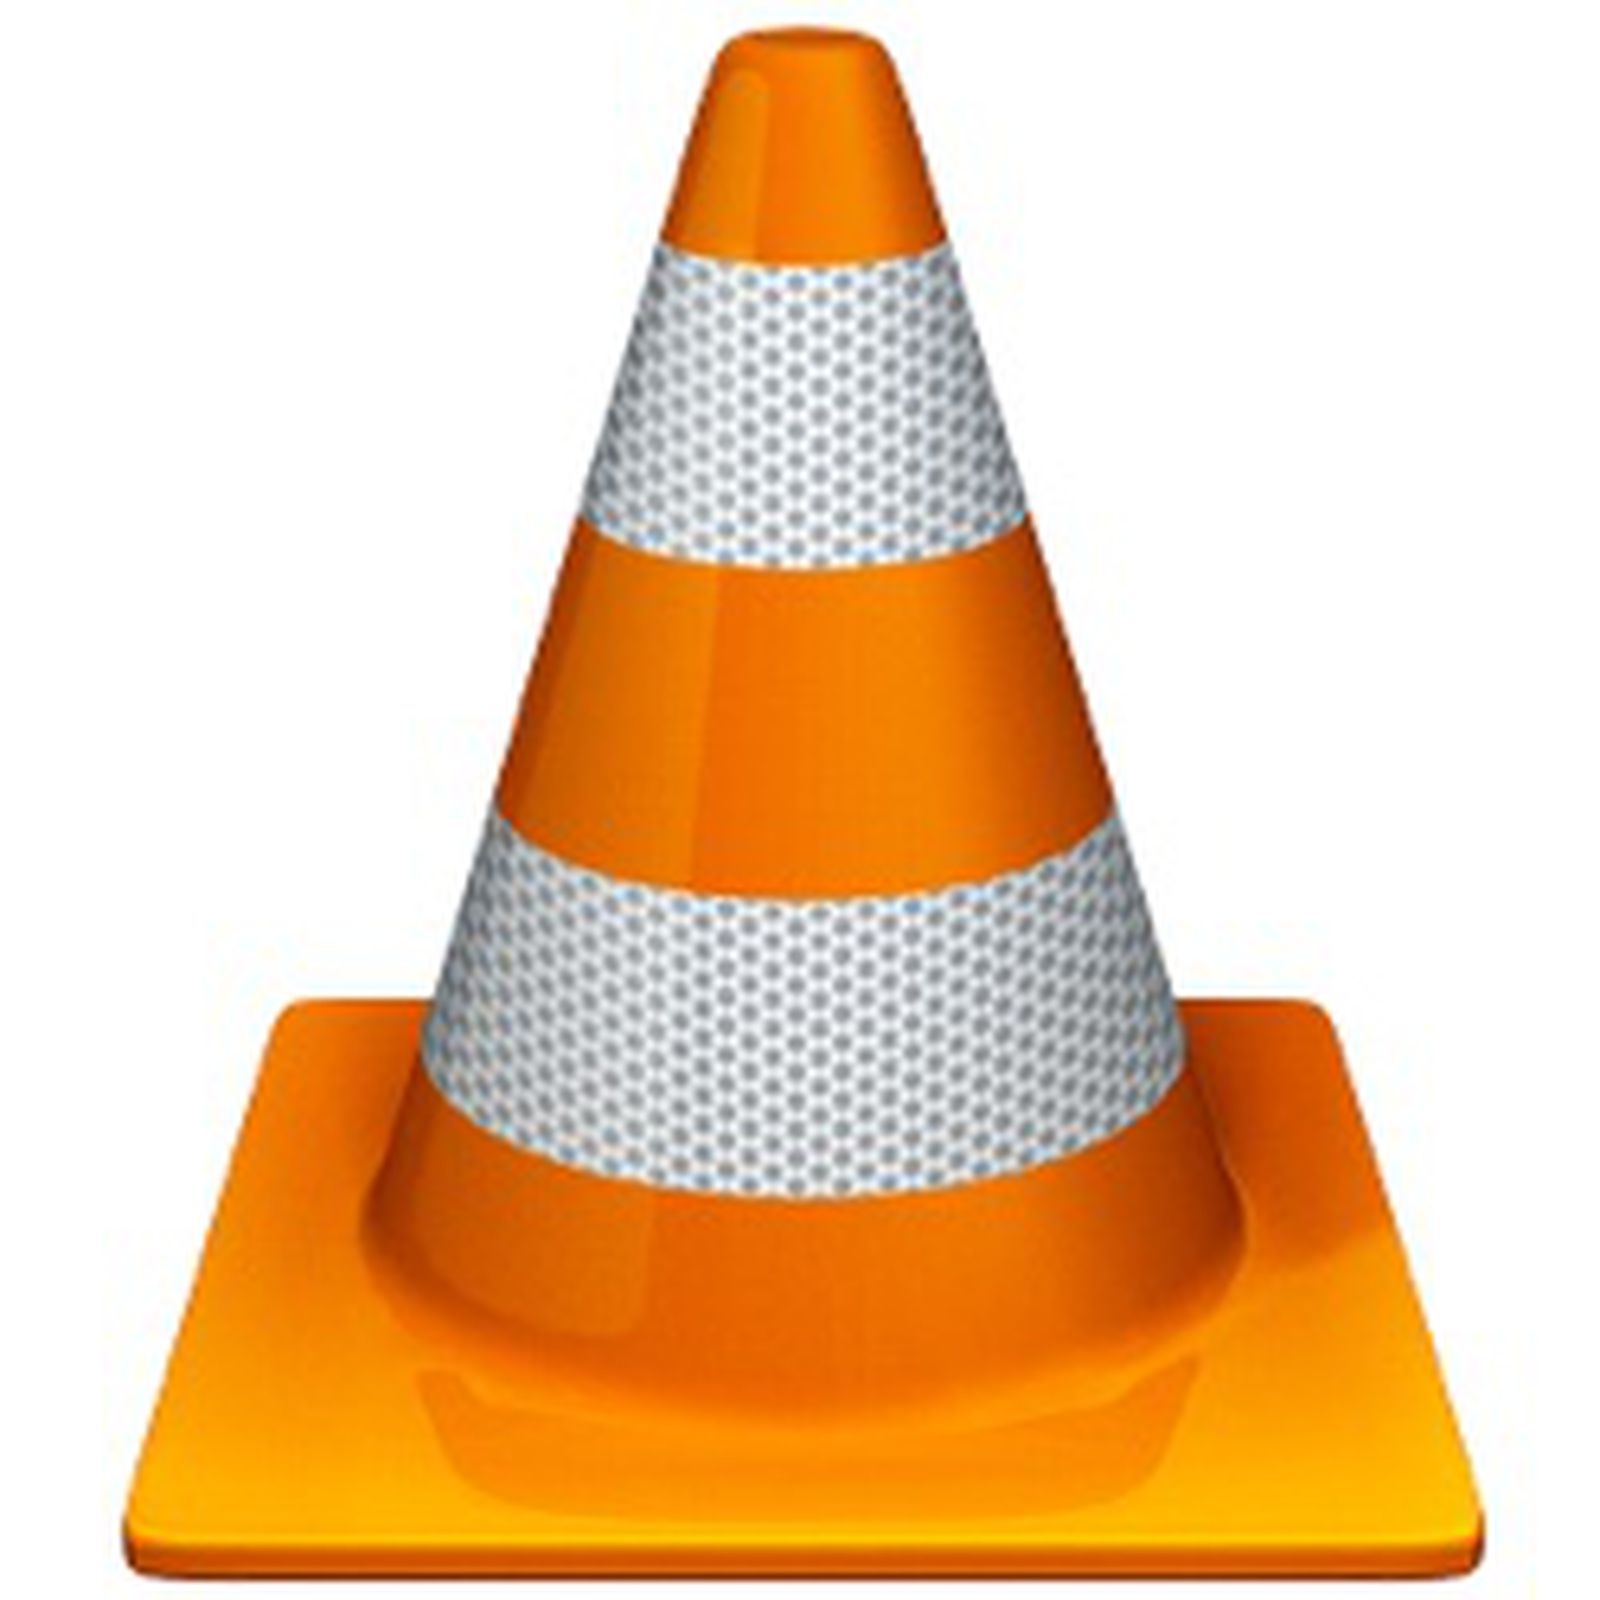 VLC Media Player for macOS With Native Support -